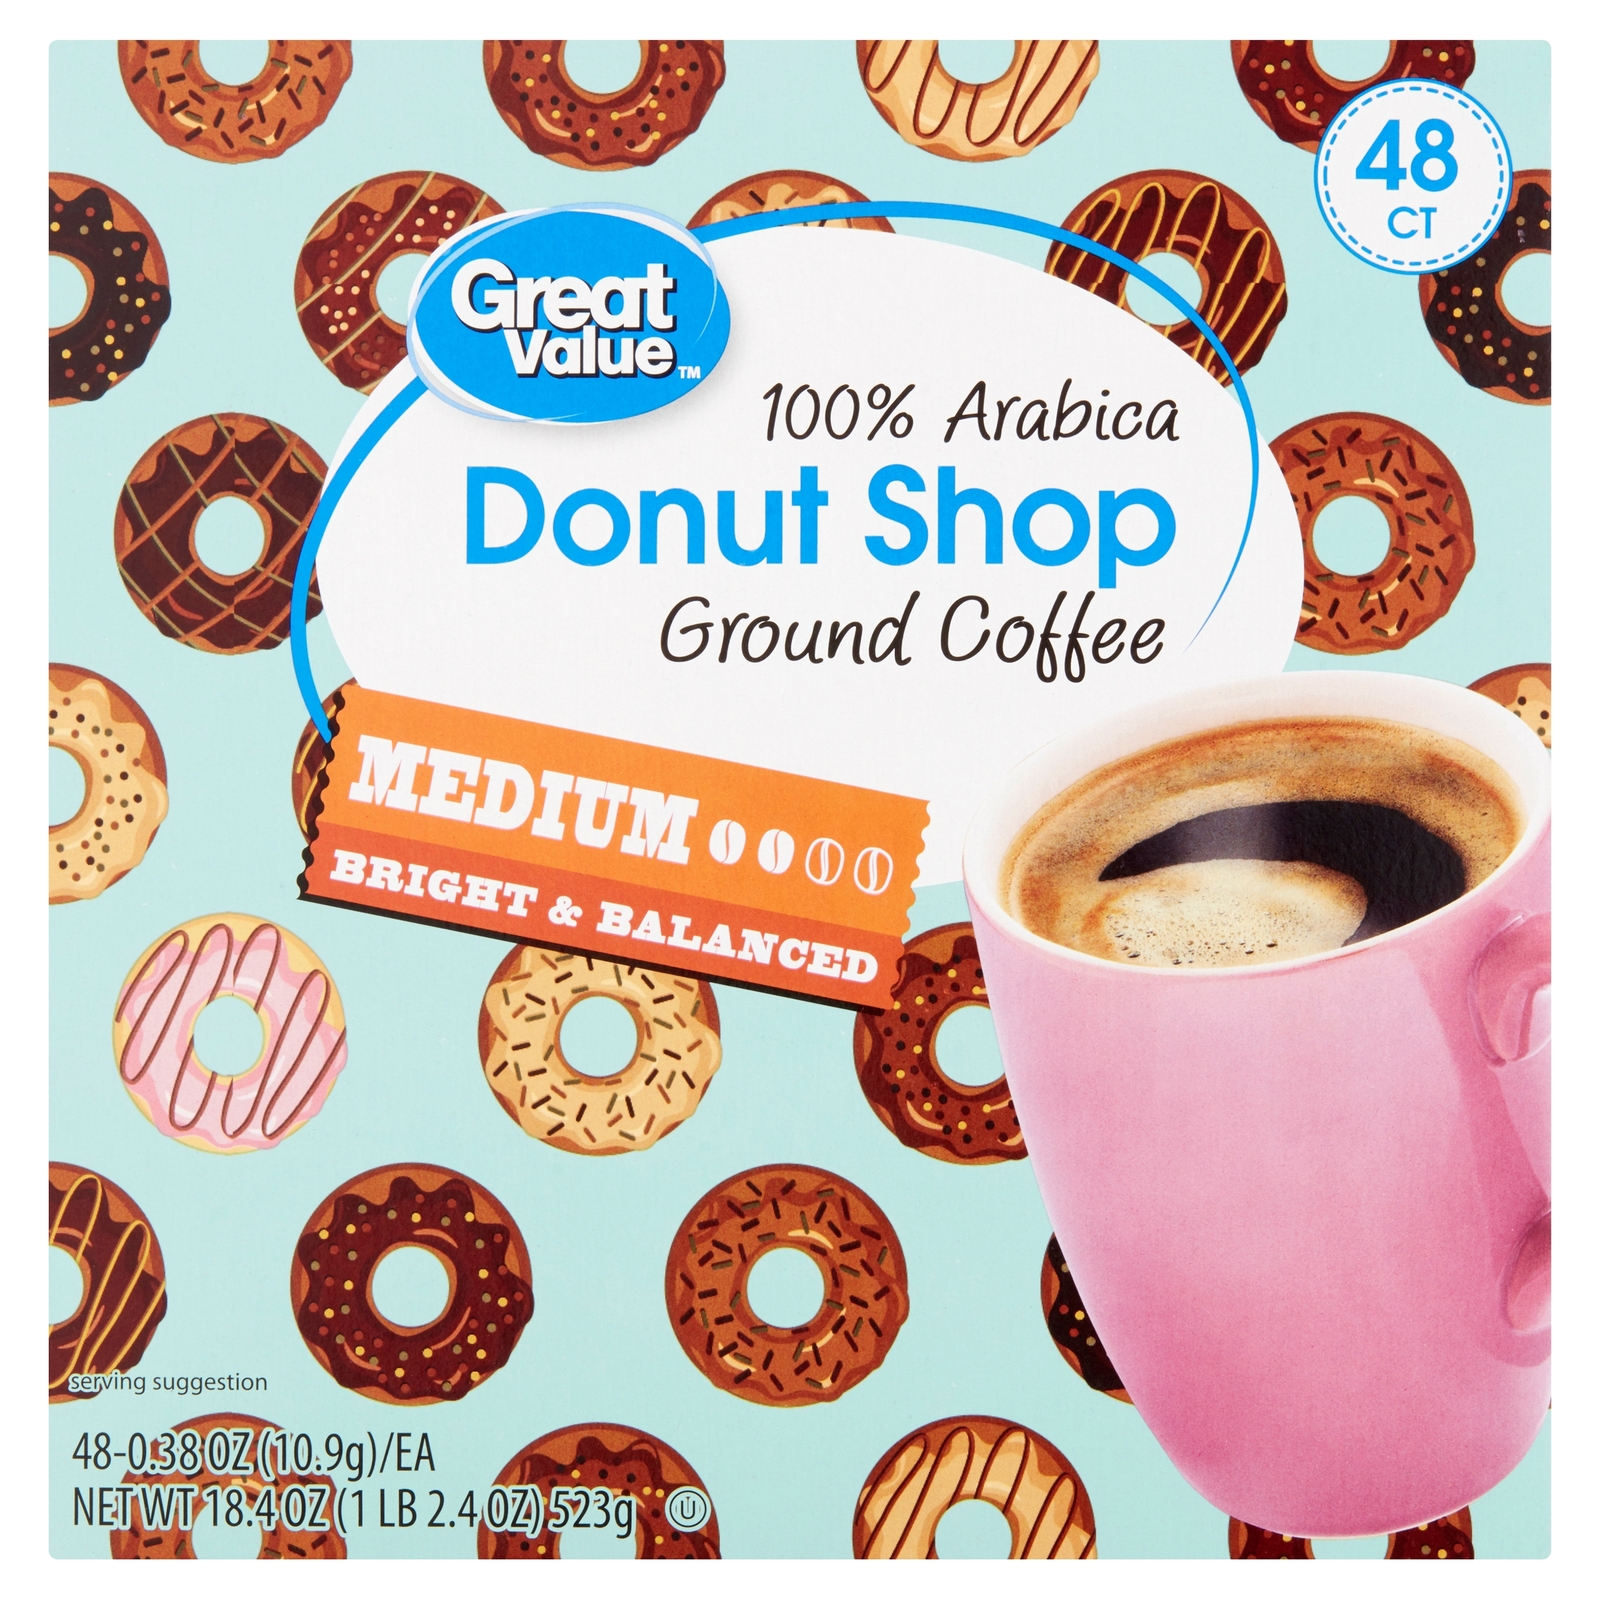 Primary image for Great Value Donut Shop 100% Arabica Medium Ground Coffee, 0.38 oz, 48 count